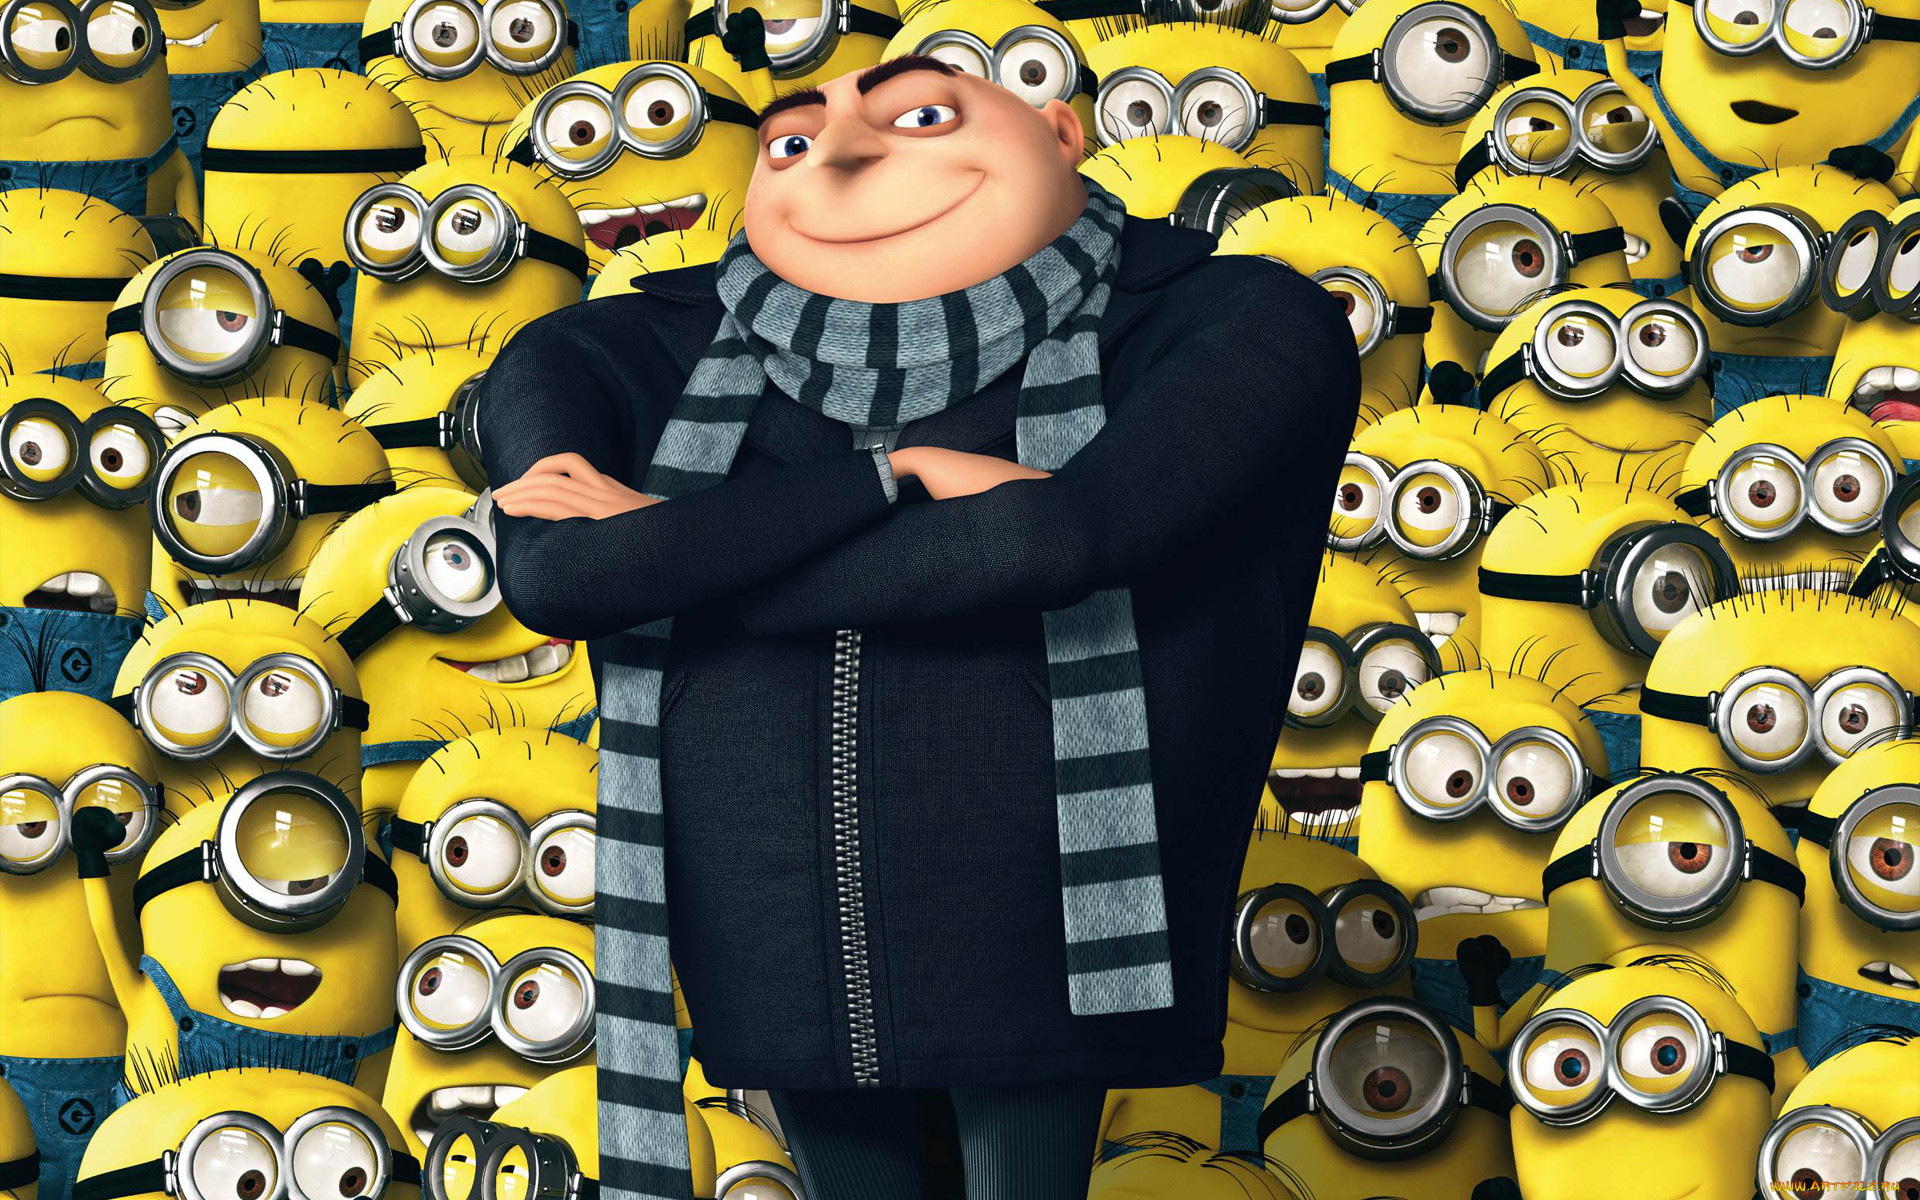 Pictures of gru from despicable me 🍓 Despicable Me 2 - Movie